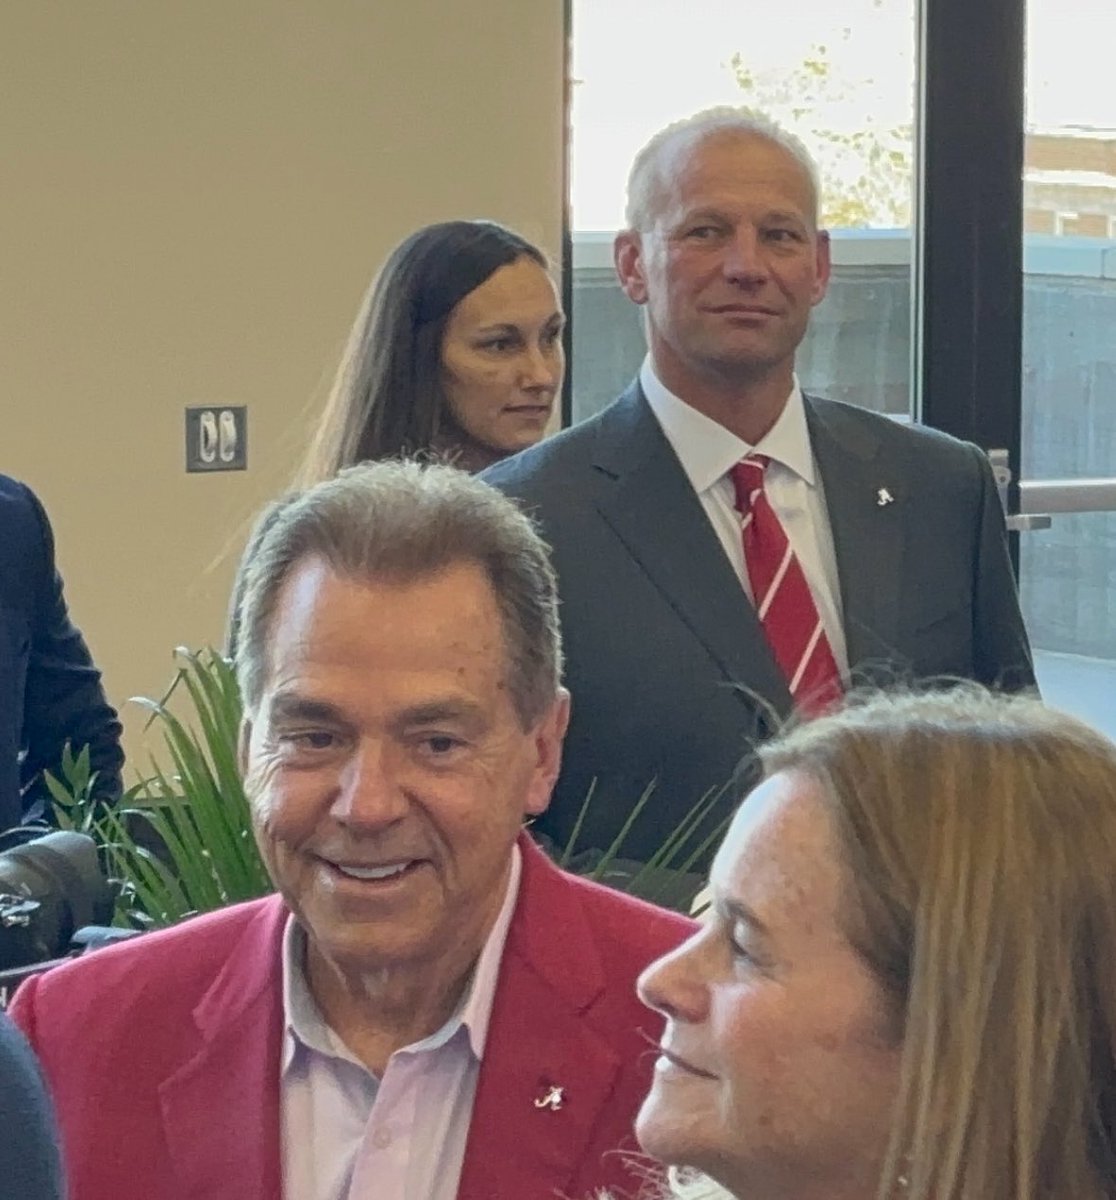 2024 NFL Draft Picks (Rounds 1-3);

DeBoer-7
Saban-6

As a recruit, you’ve gotta see them together on campus and realize this is the best place to get you to the league.

Alabama is #NFLU.